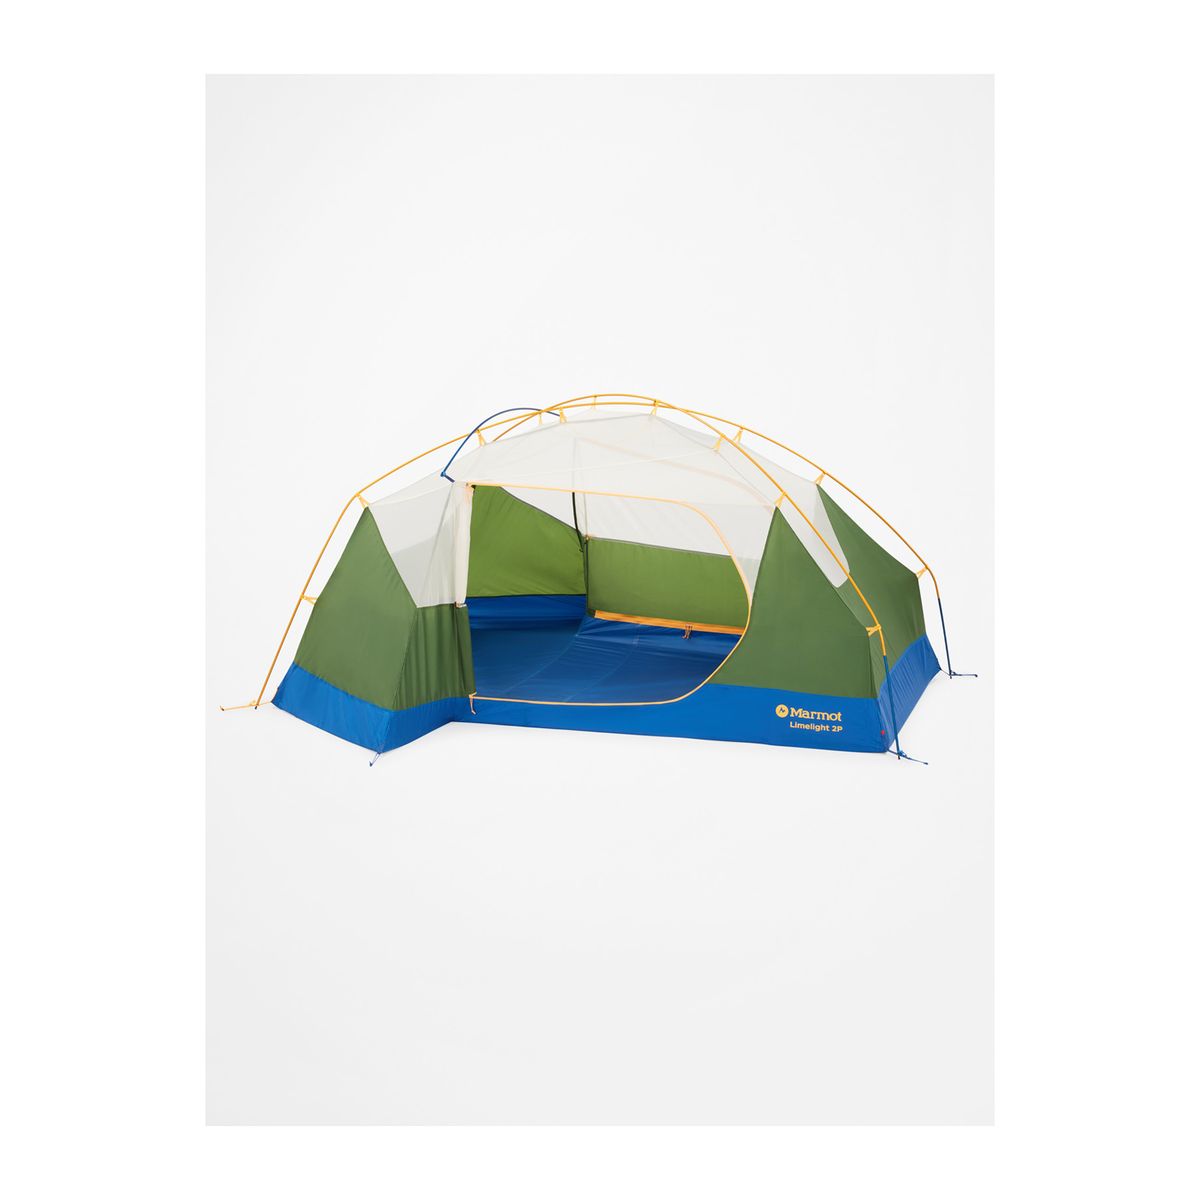 Limelight 2-Person tent